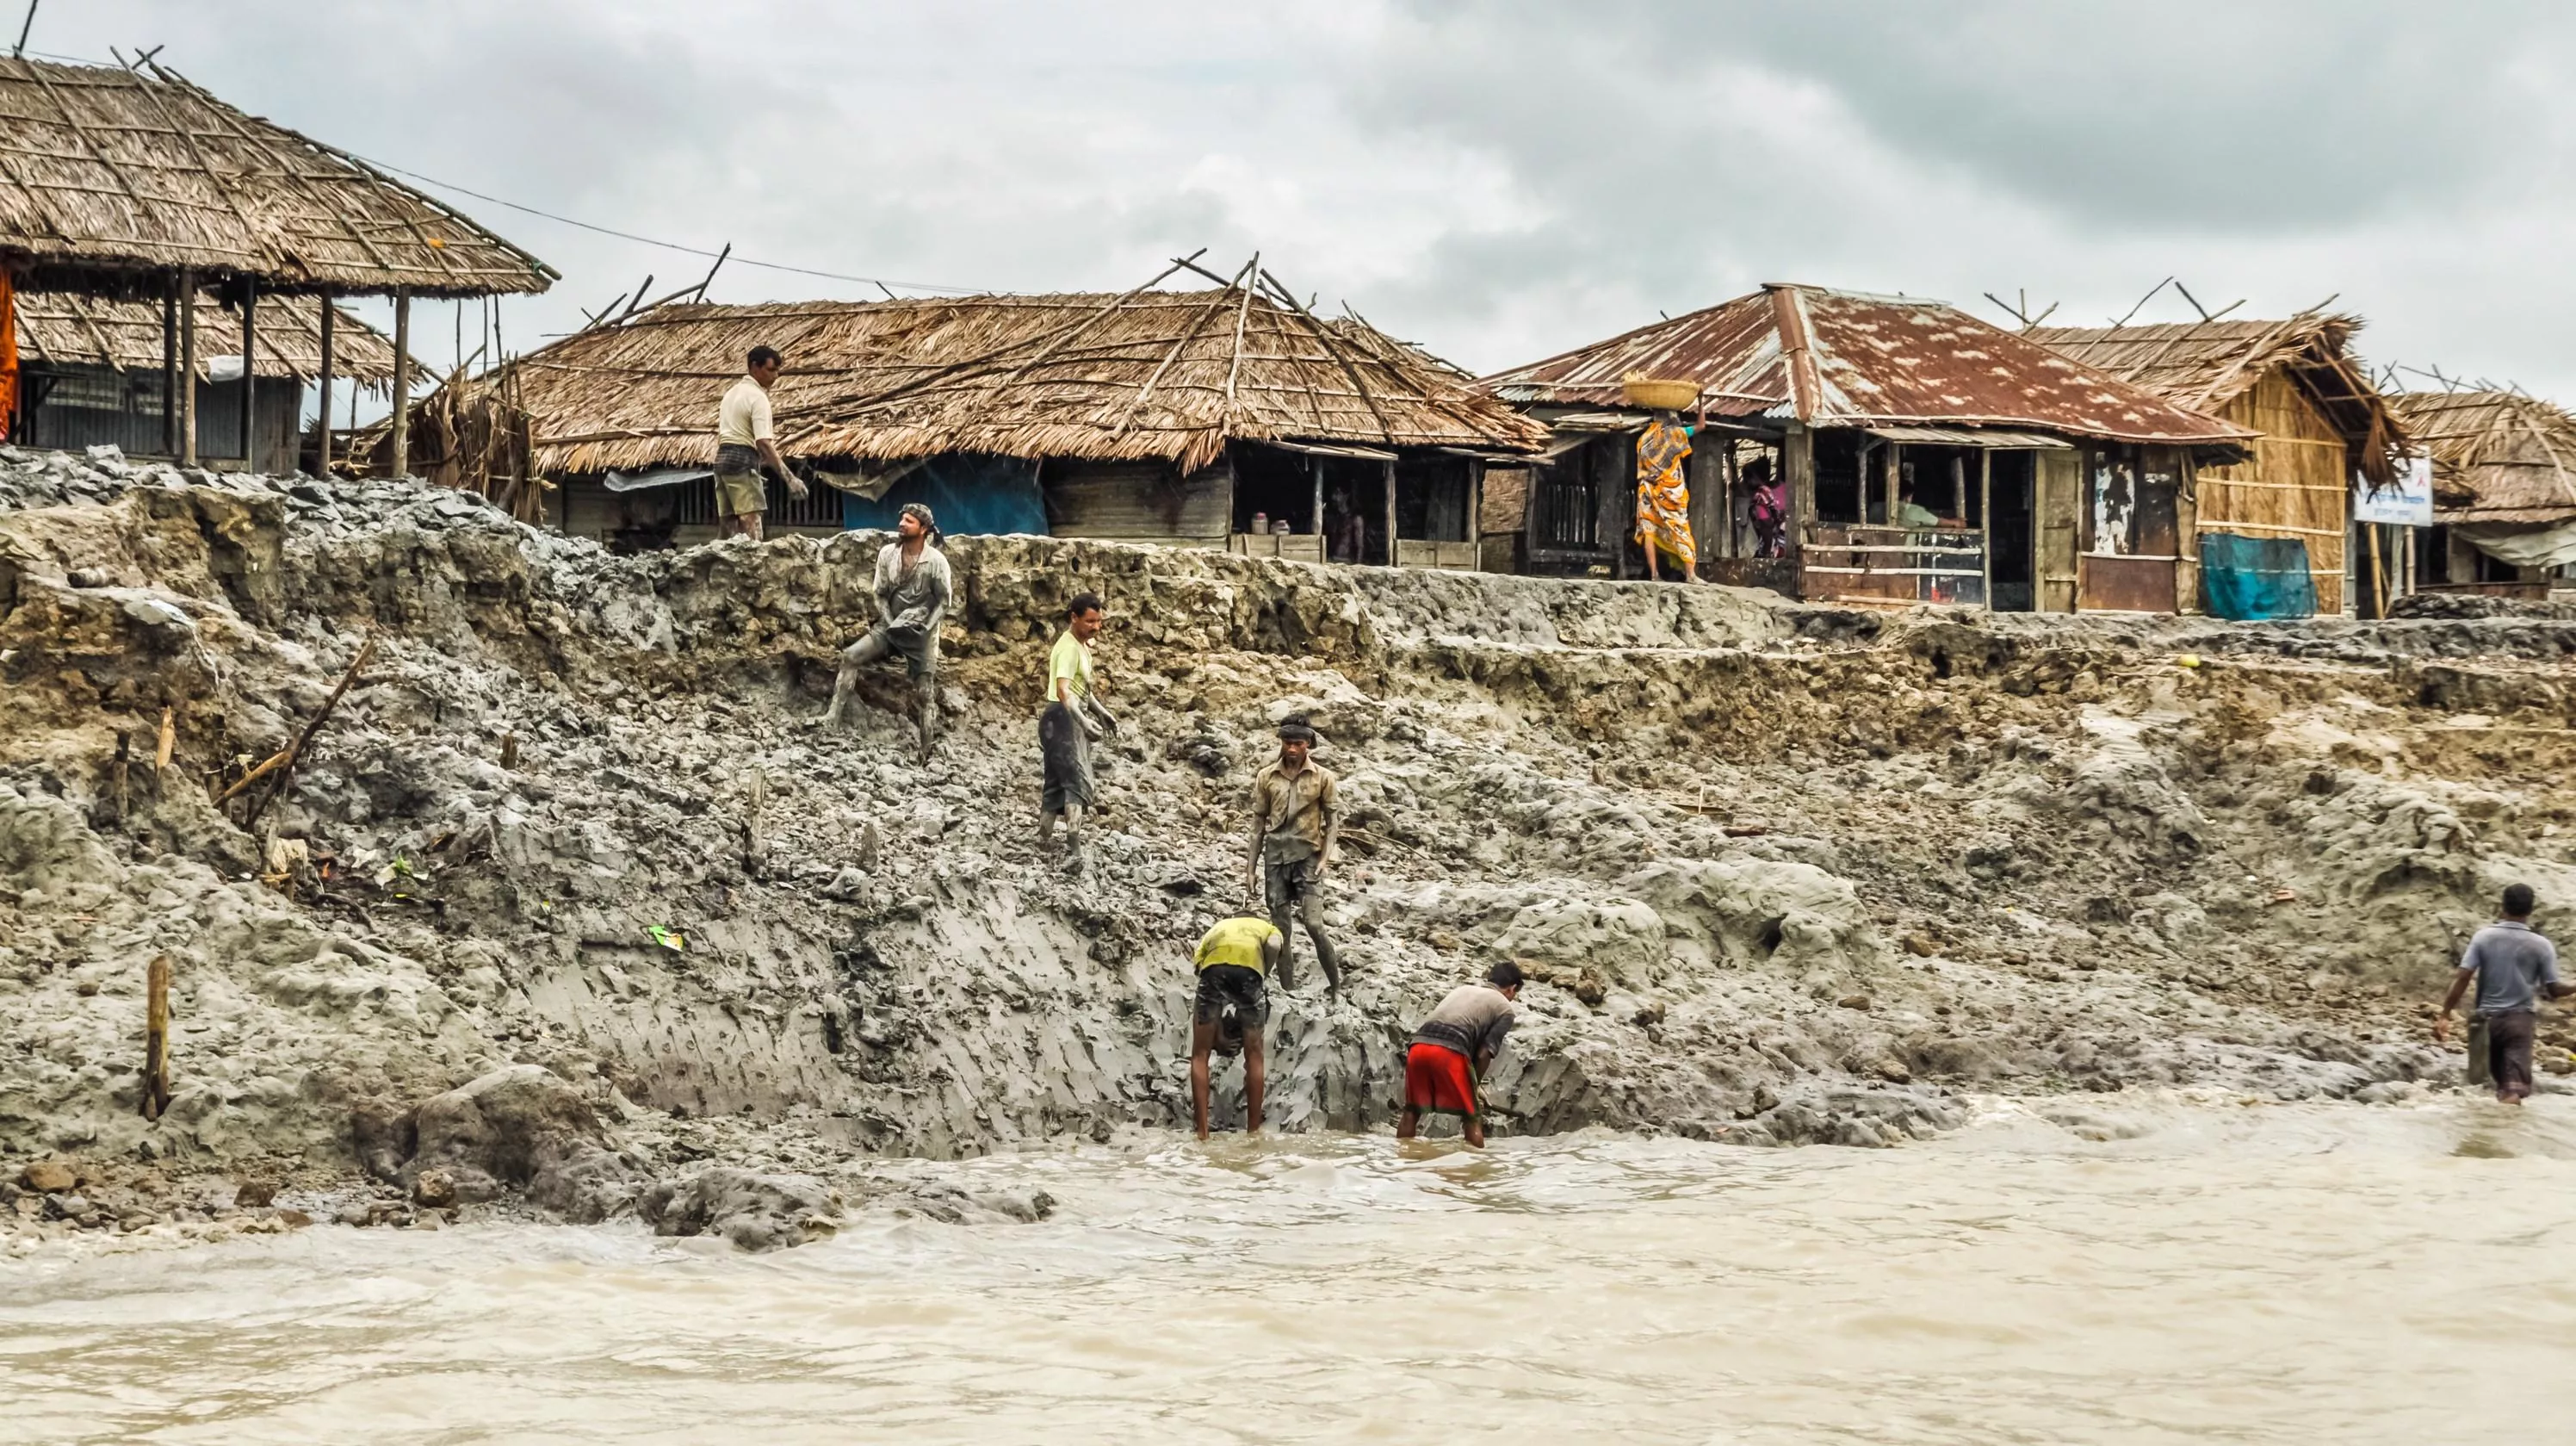 Men work on a muddy embankment with a river in the foreground and simple houses in the background.